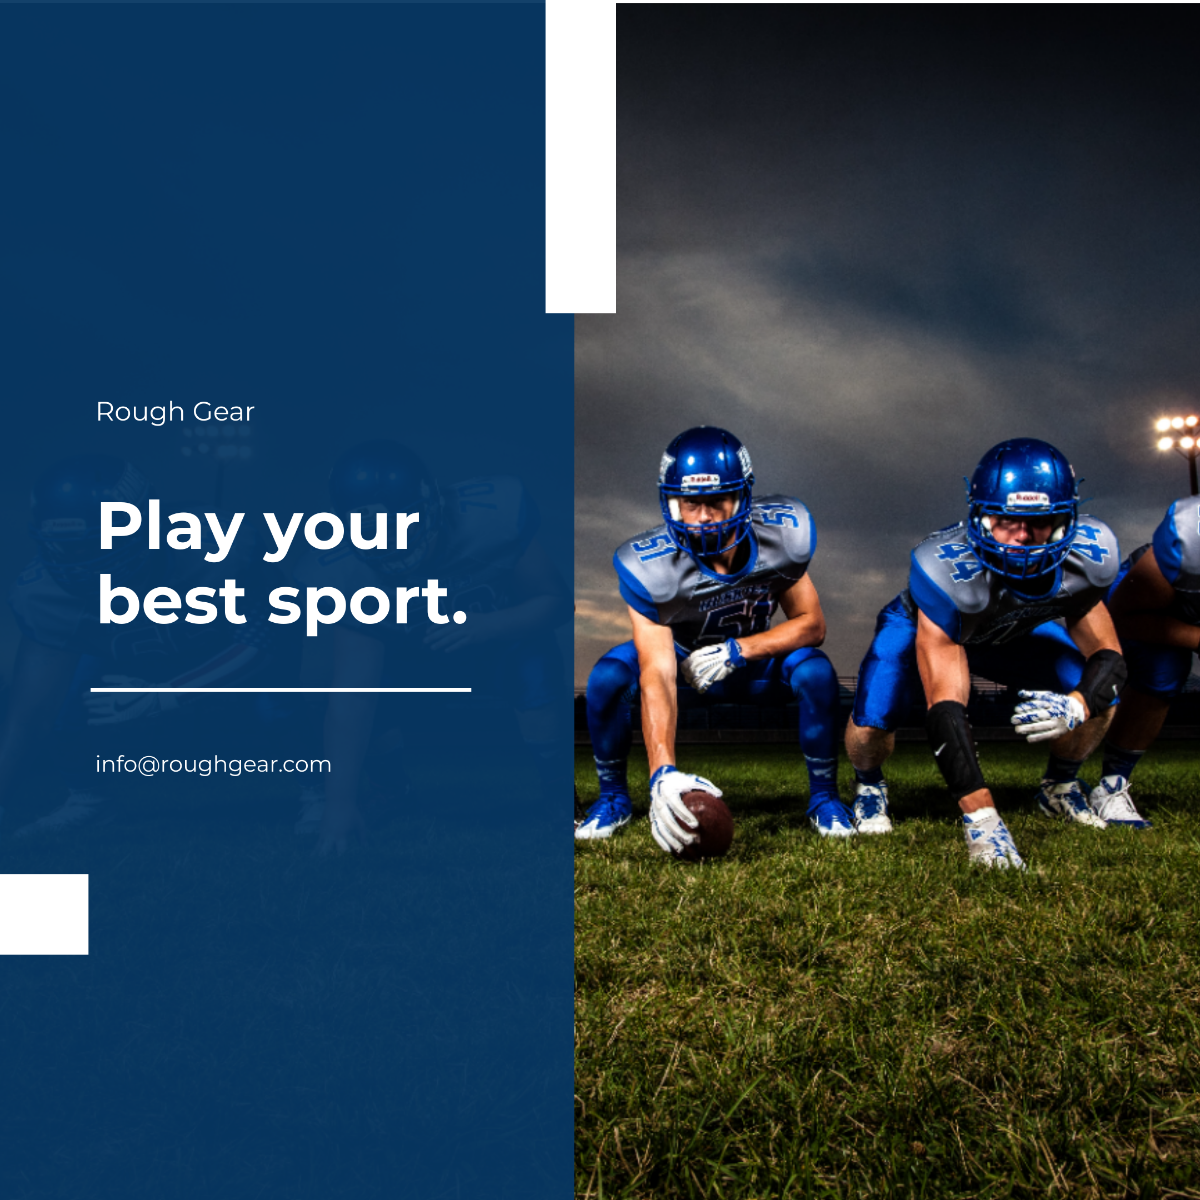 Sports Instagram Ad Post Template